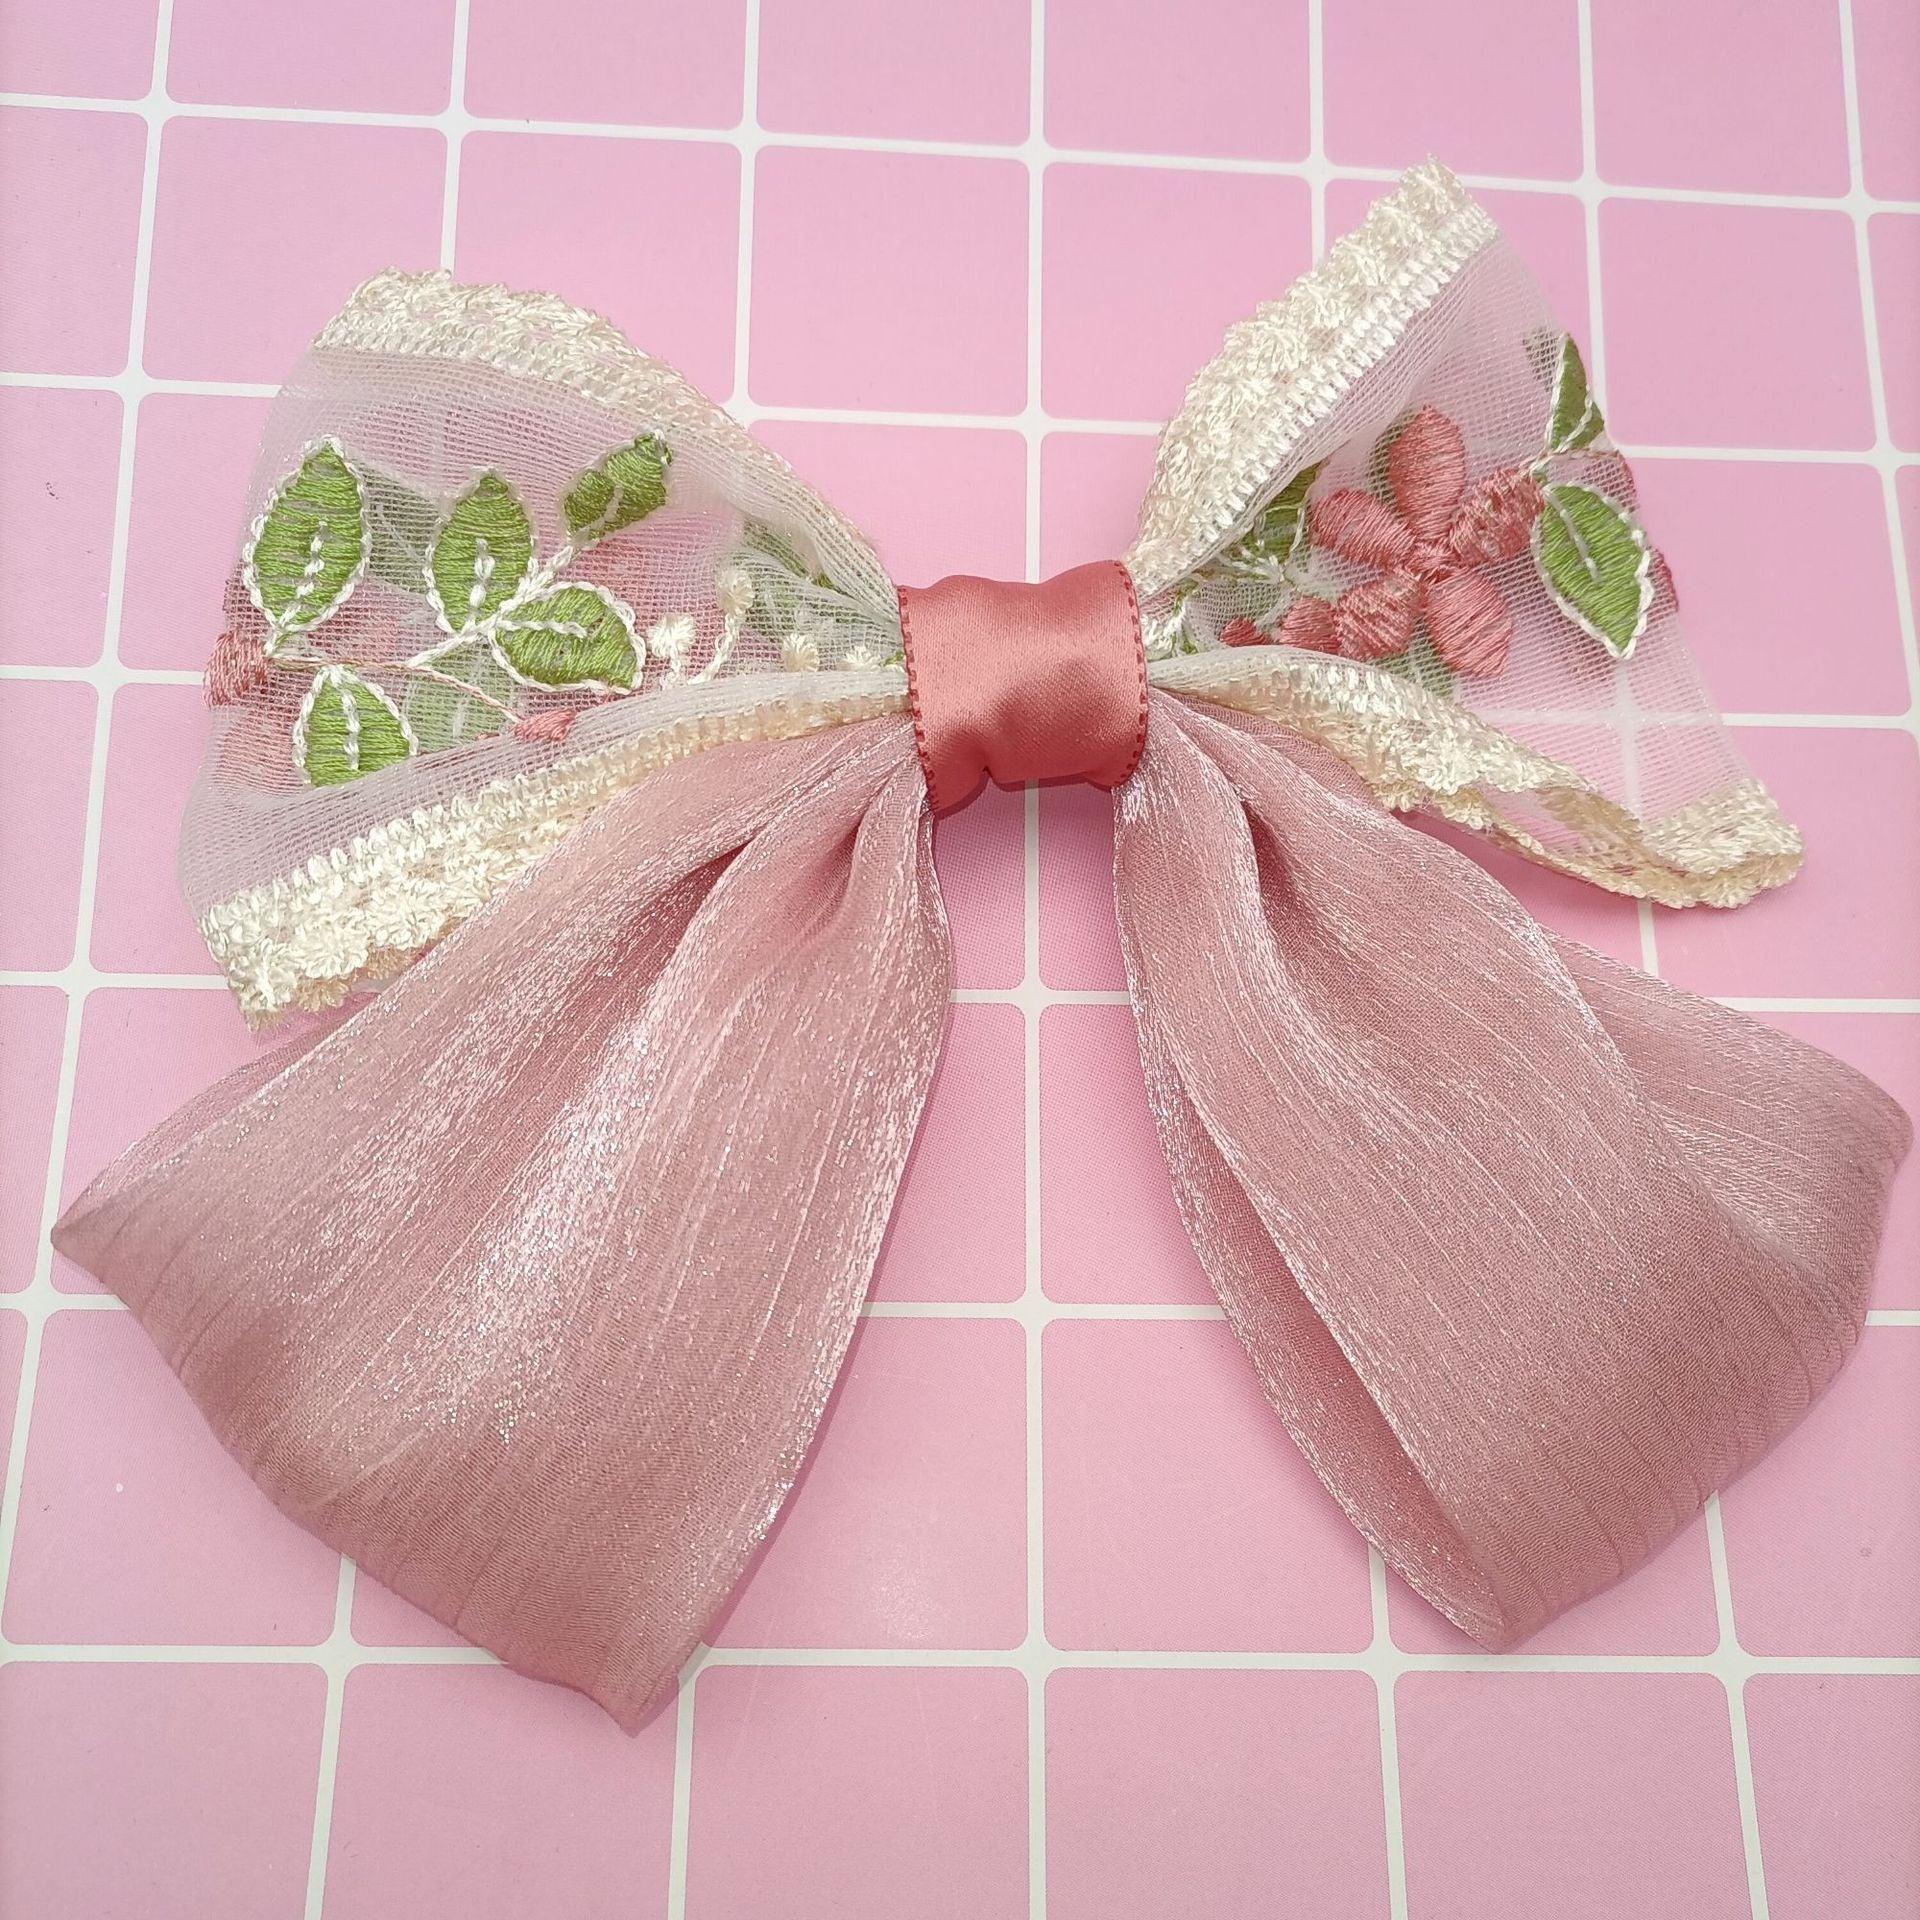 [AUTUMN SALE] 1 PCS Glittering Lace with Embroidery Flowers Hair Bow Hair Clip - Belle Rose Nails